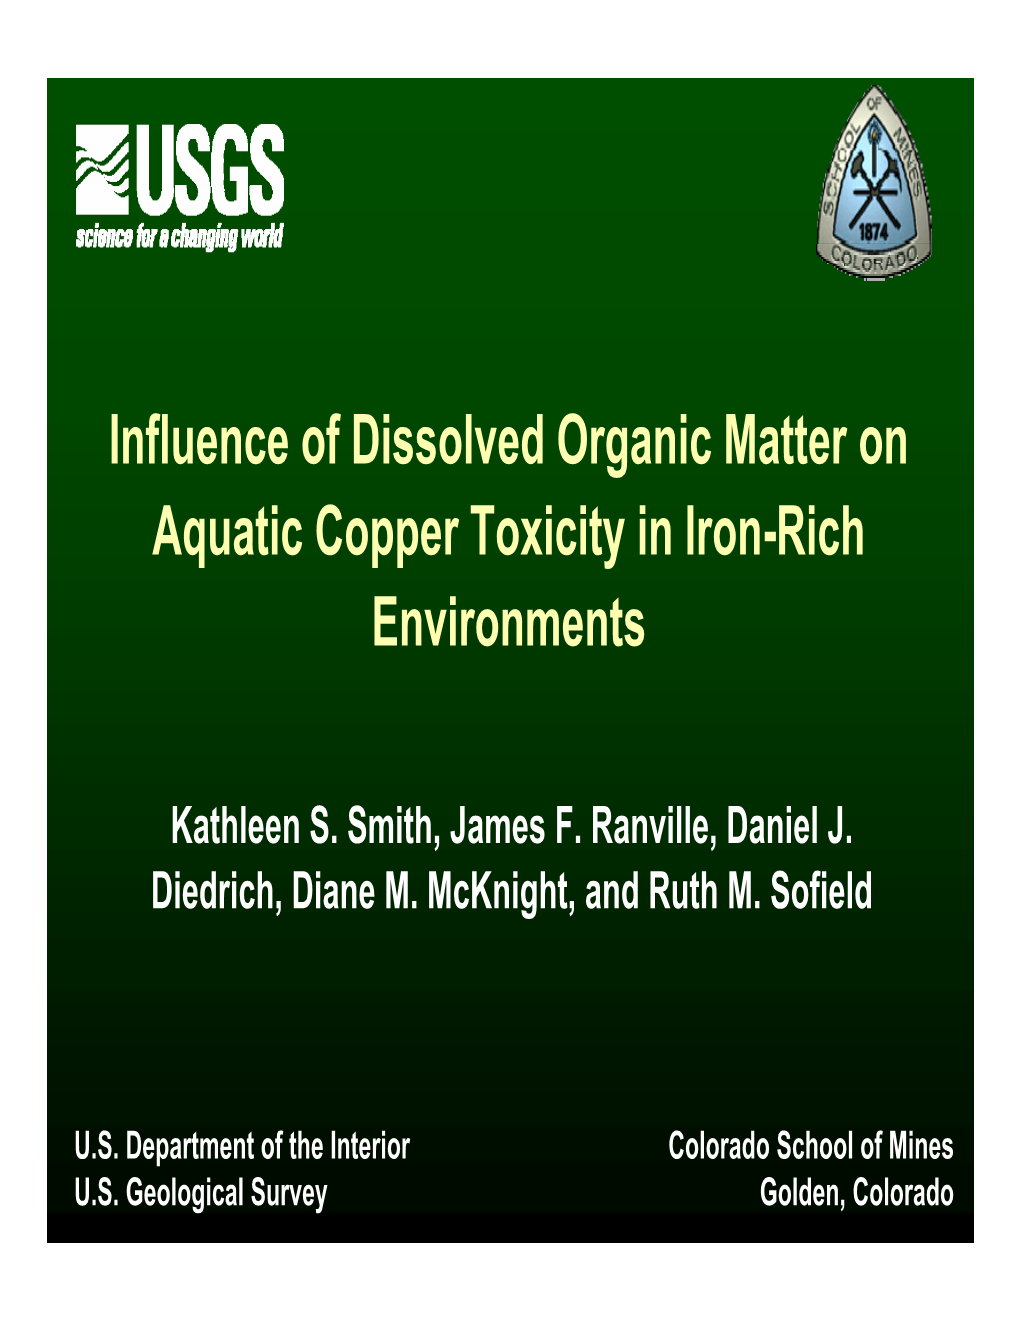 Influence of Dissolved Organic Matter on Aquatic Copper Toxicity in Iron-Rich Environments